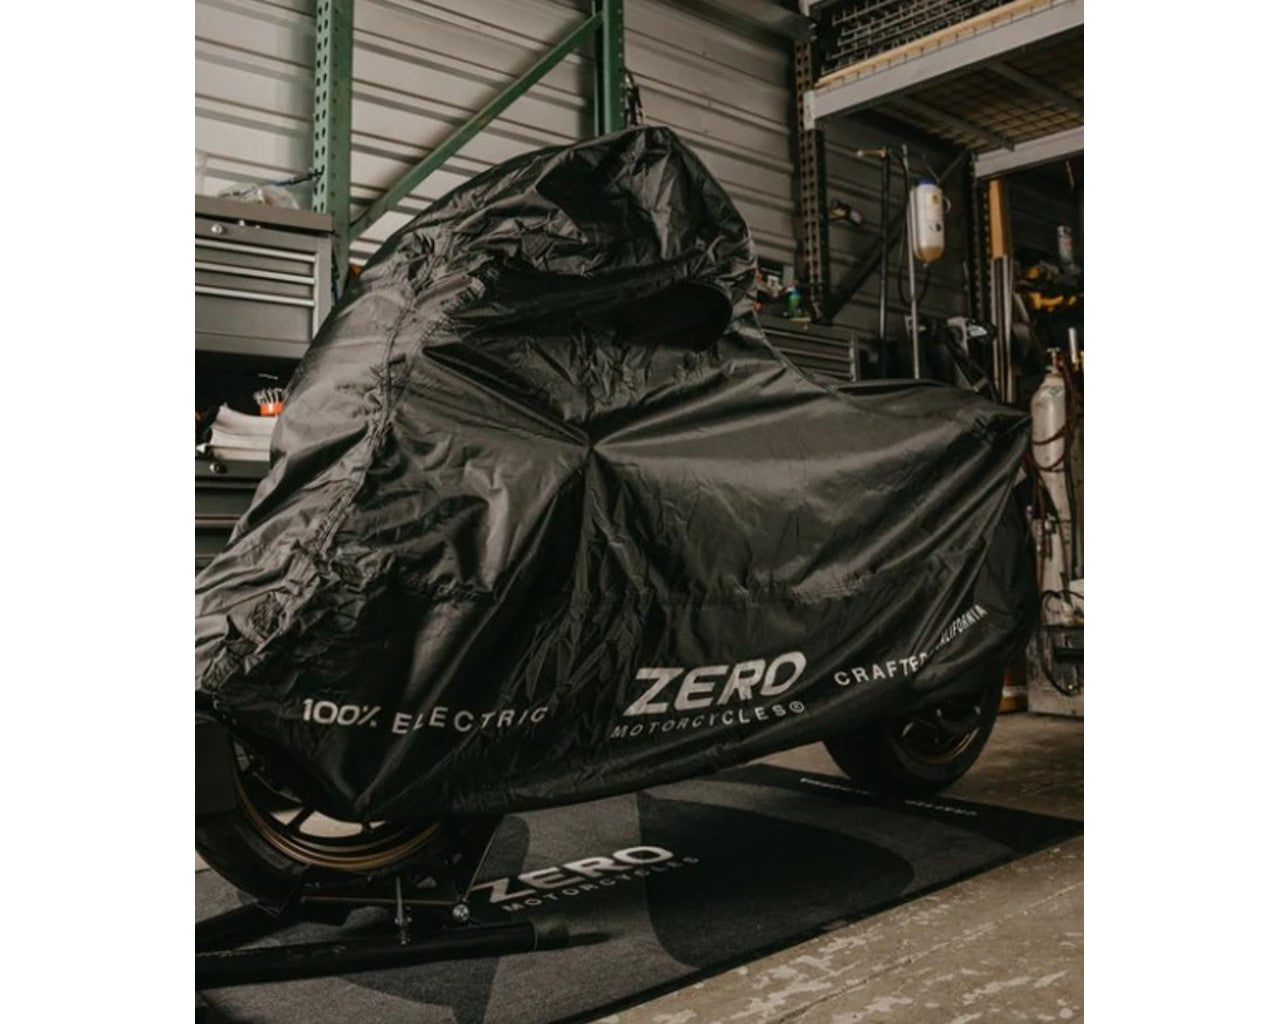 ZERO Motorcycles Motorcycle Cover With Bag FX DS SR FXE DSR S SR/f SR/S 10-08126